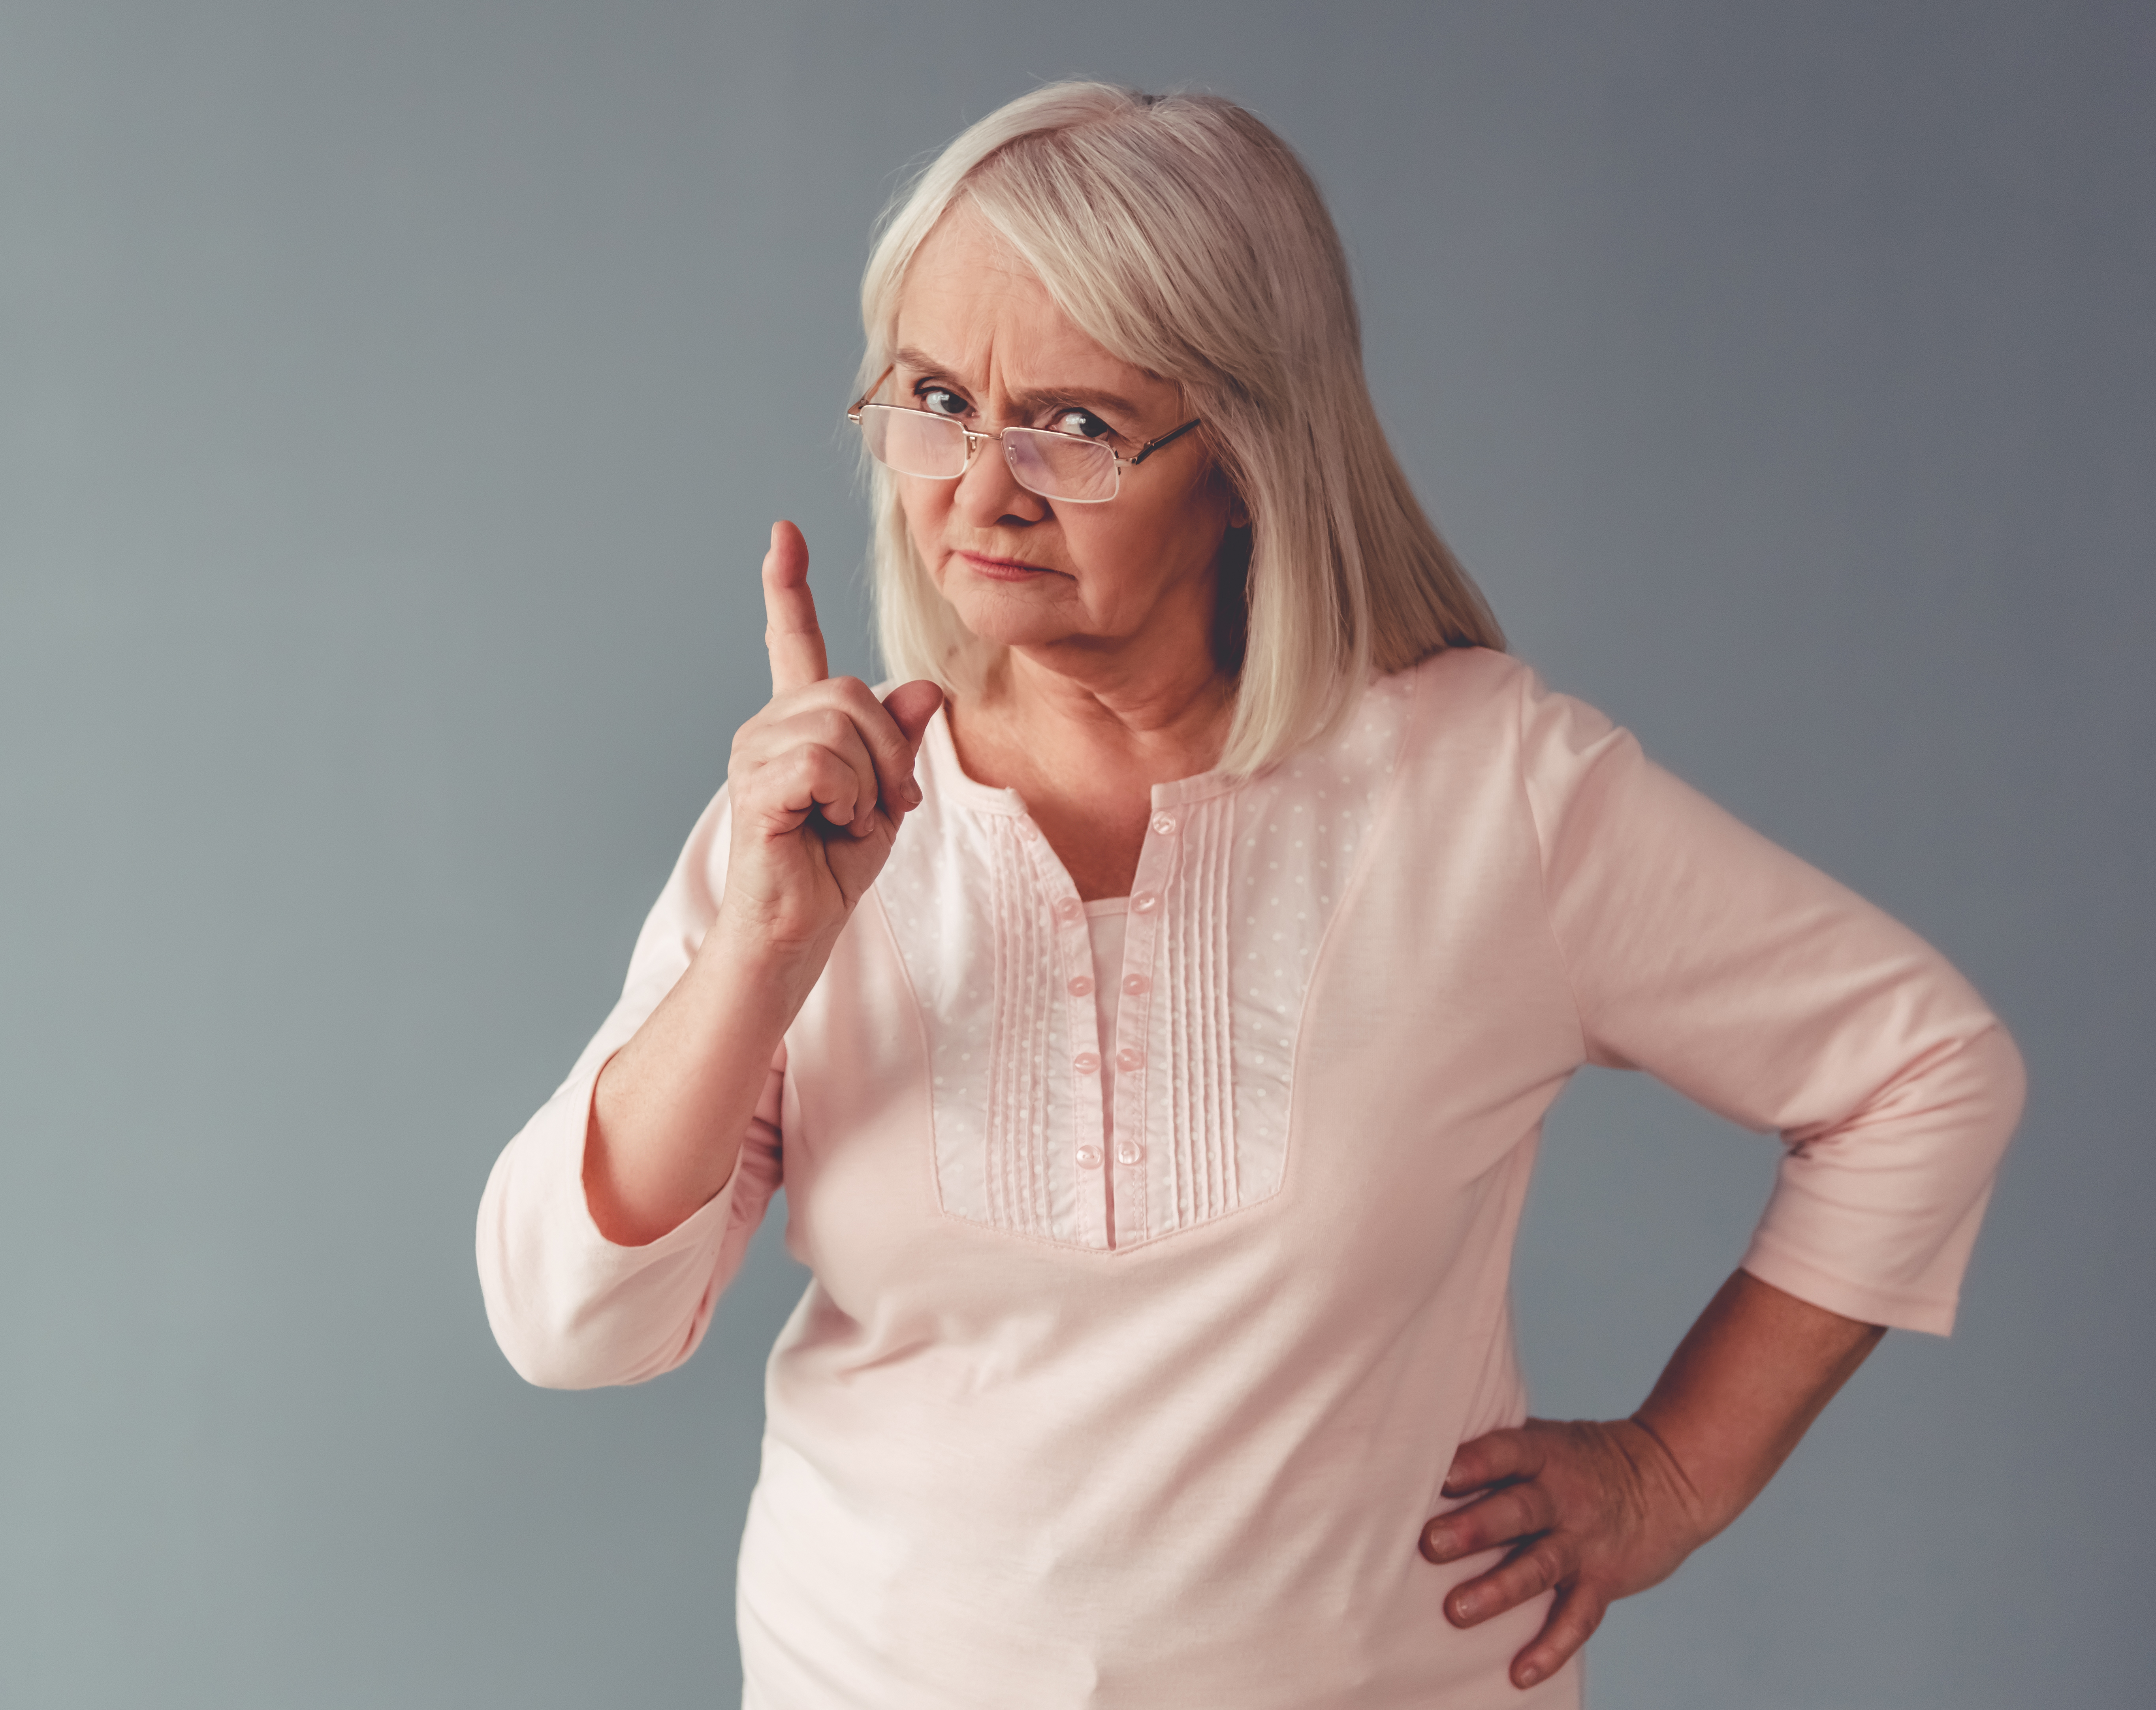 An angry older woman warning with her finger | Source: Shutterstock